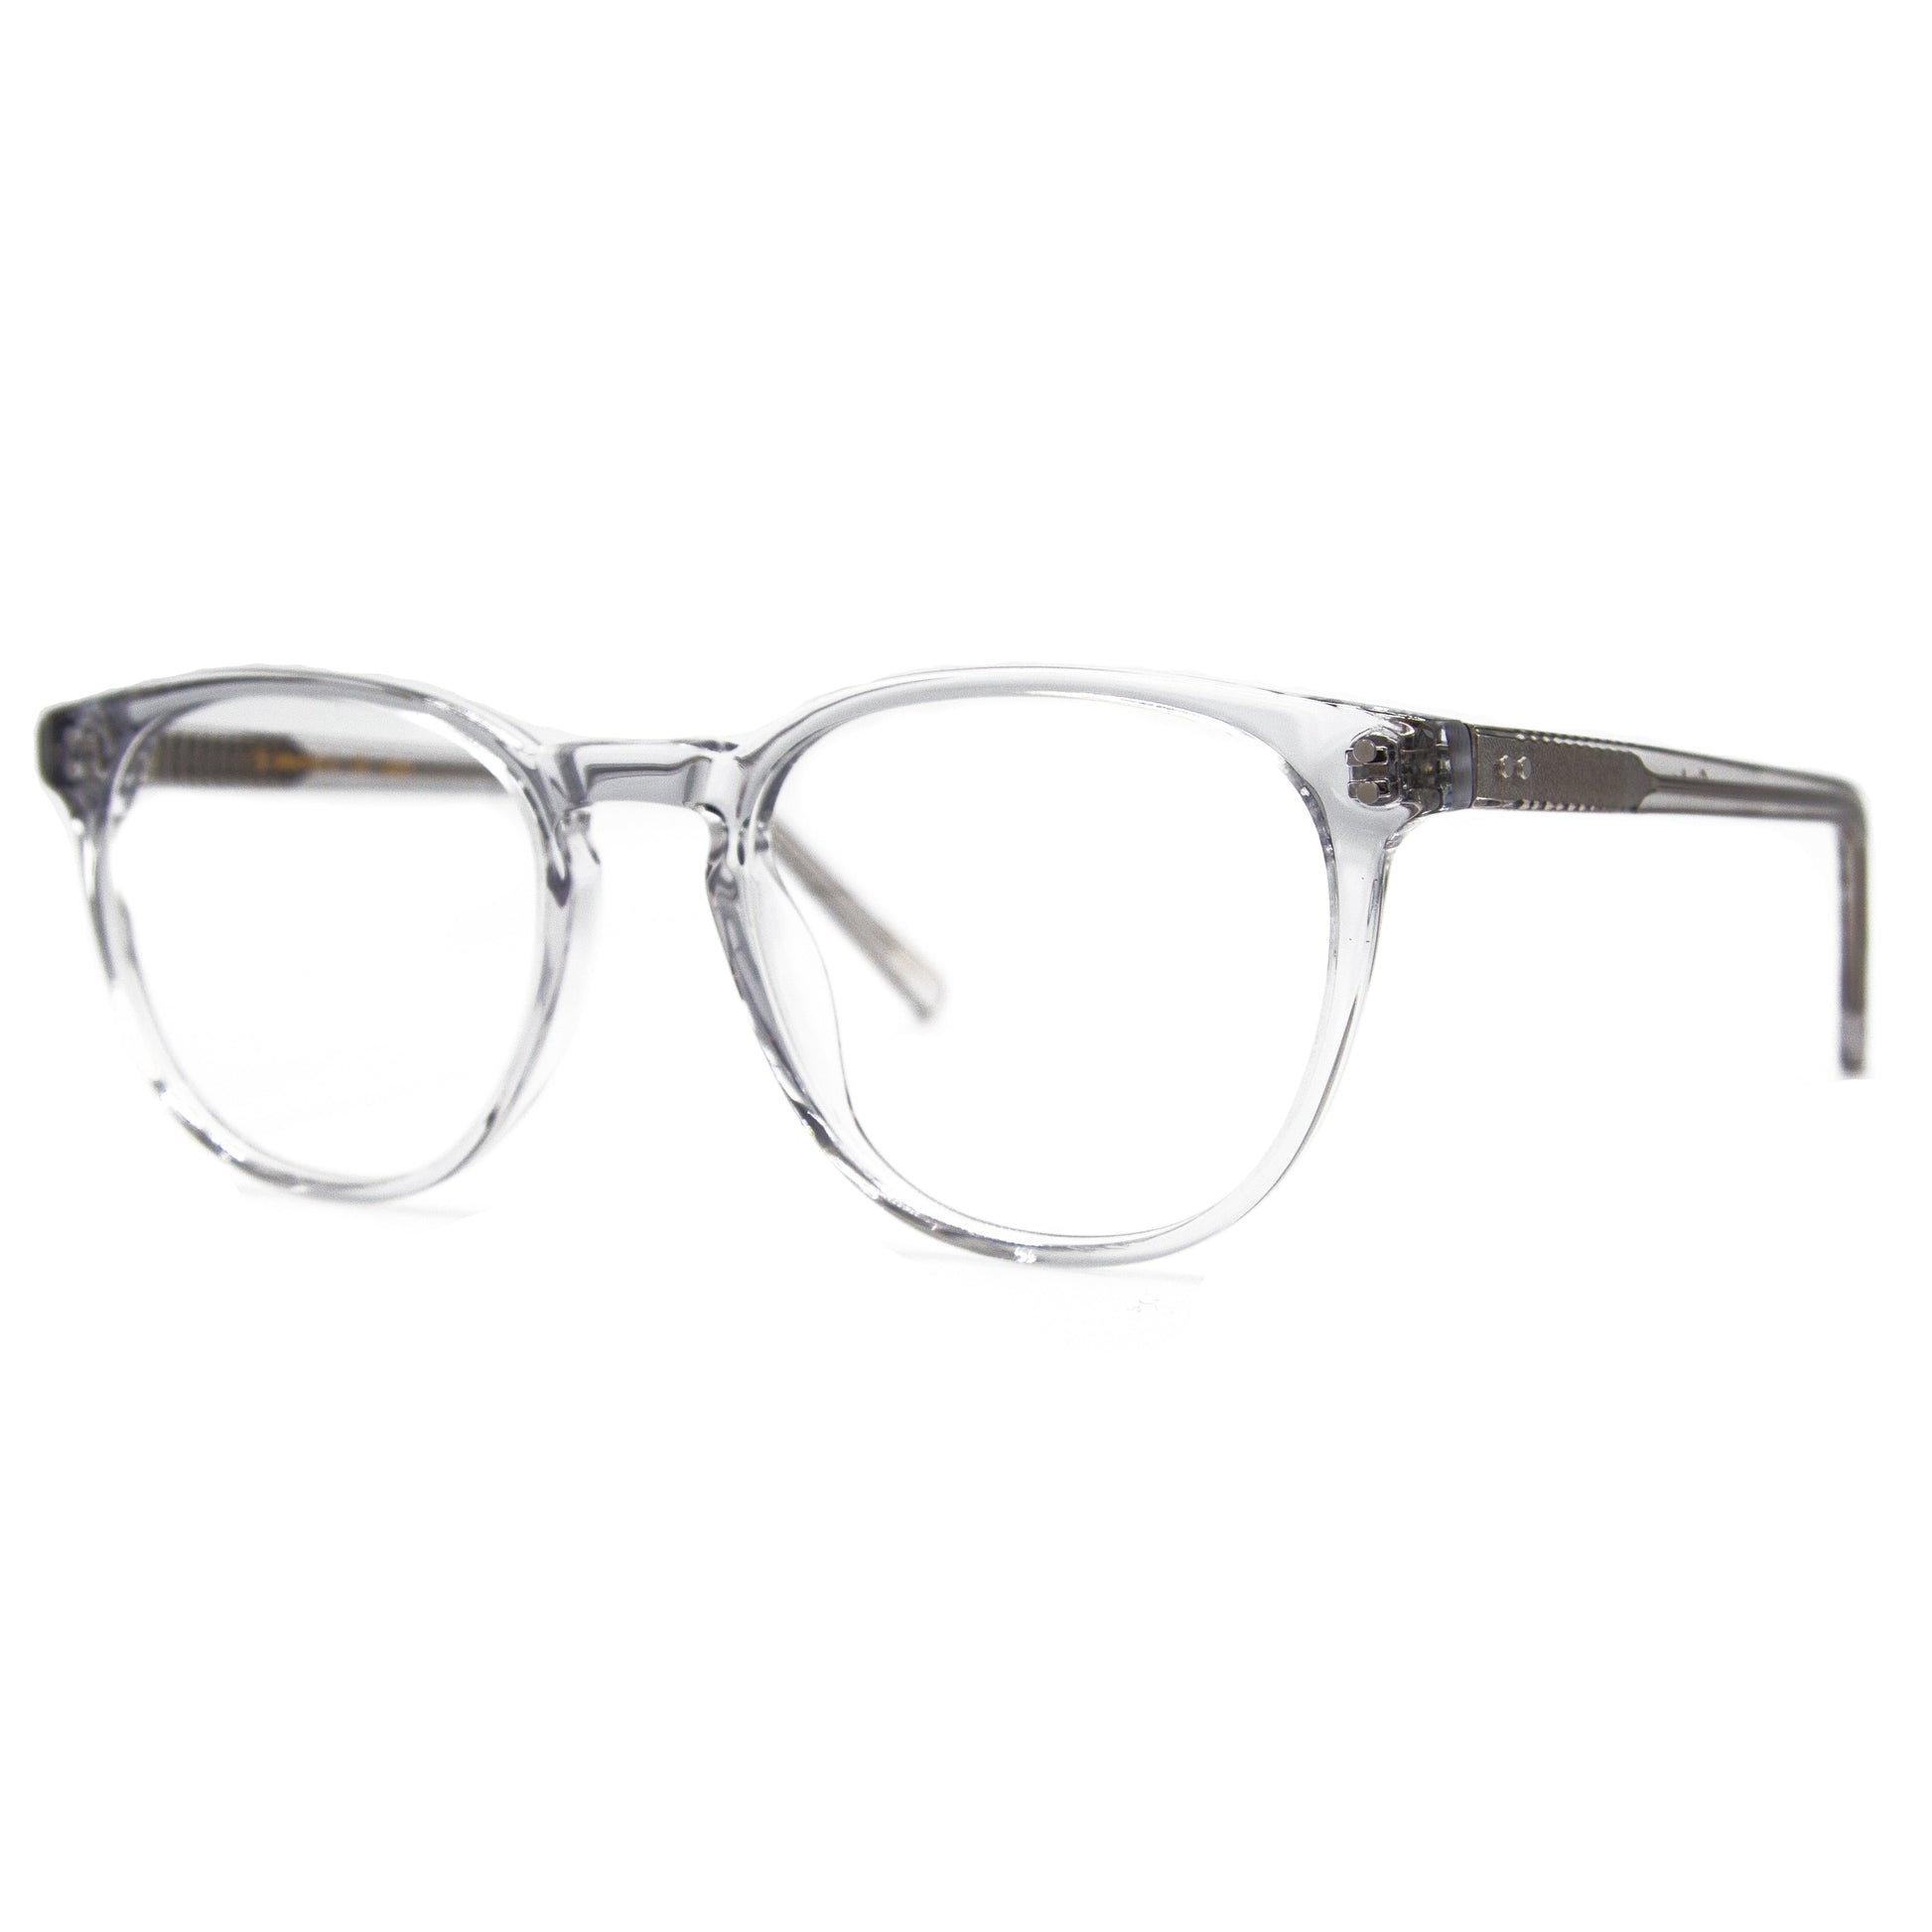 3 brothers - Ant - Crystal - Prescription Glasses - Side